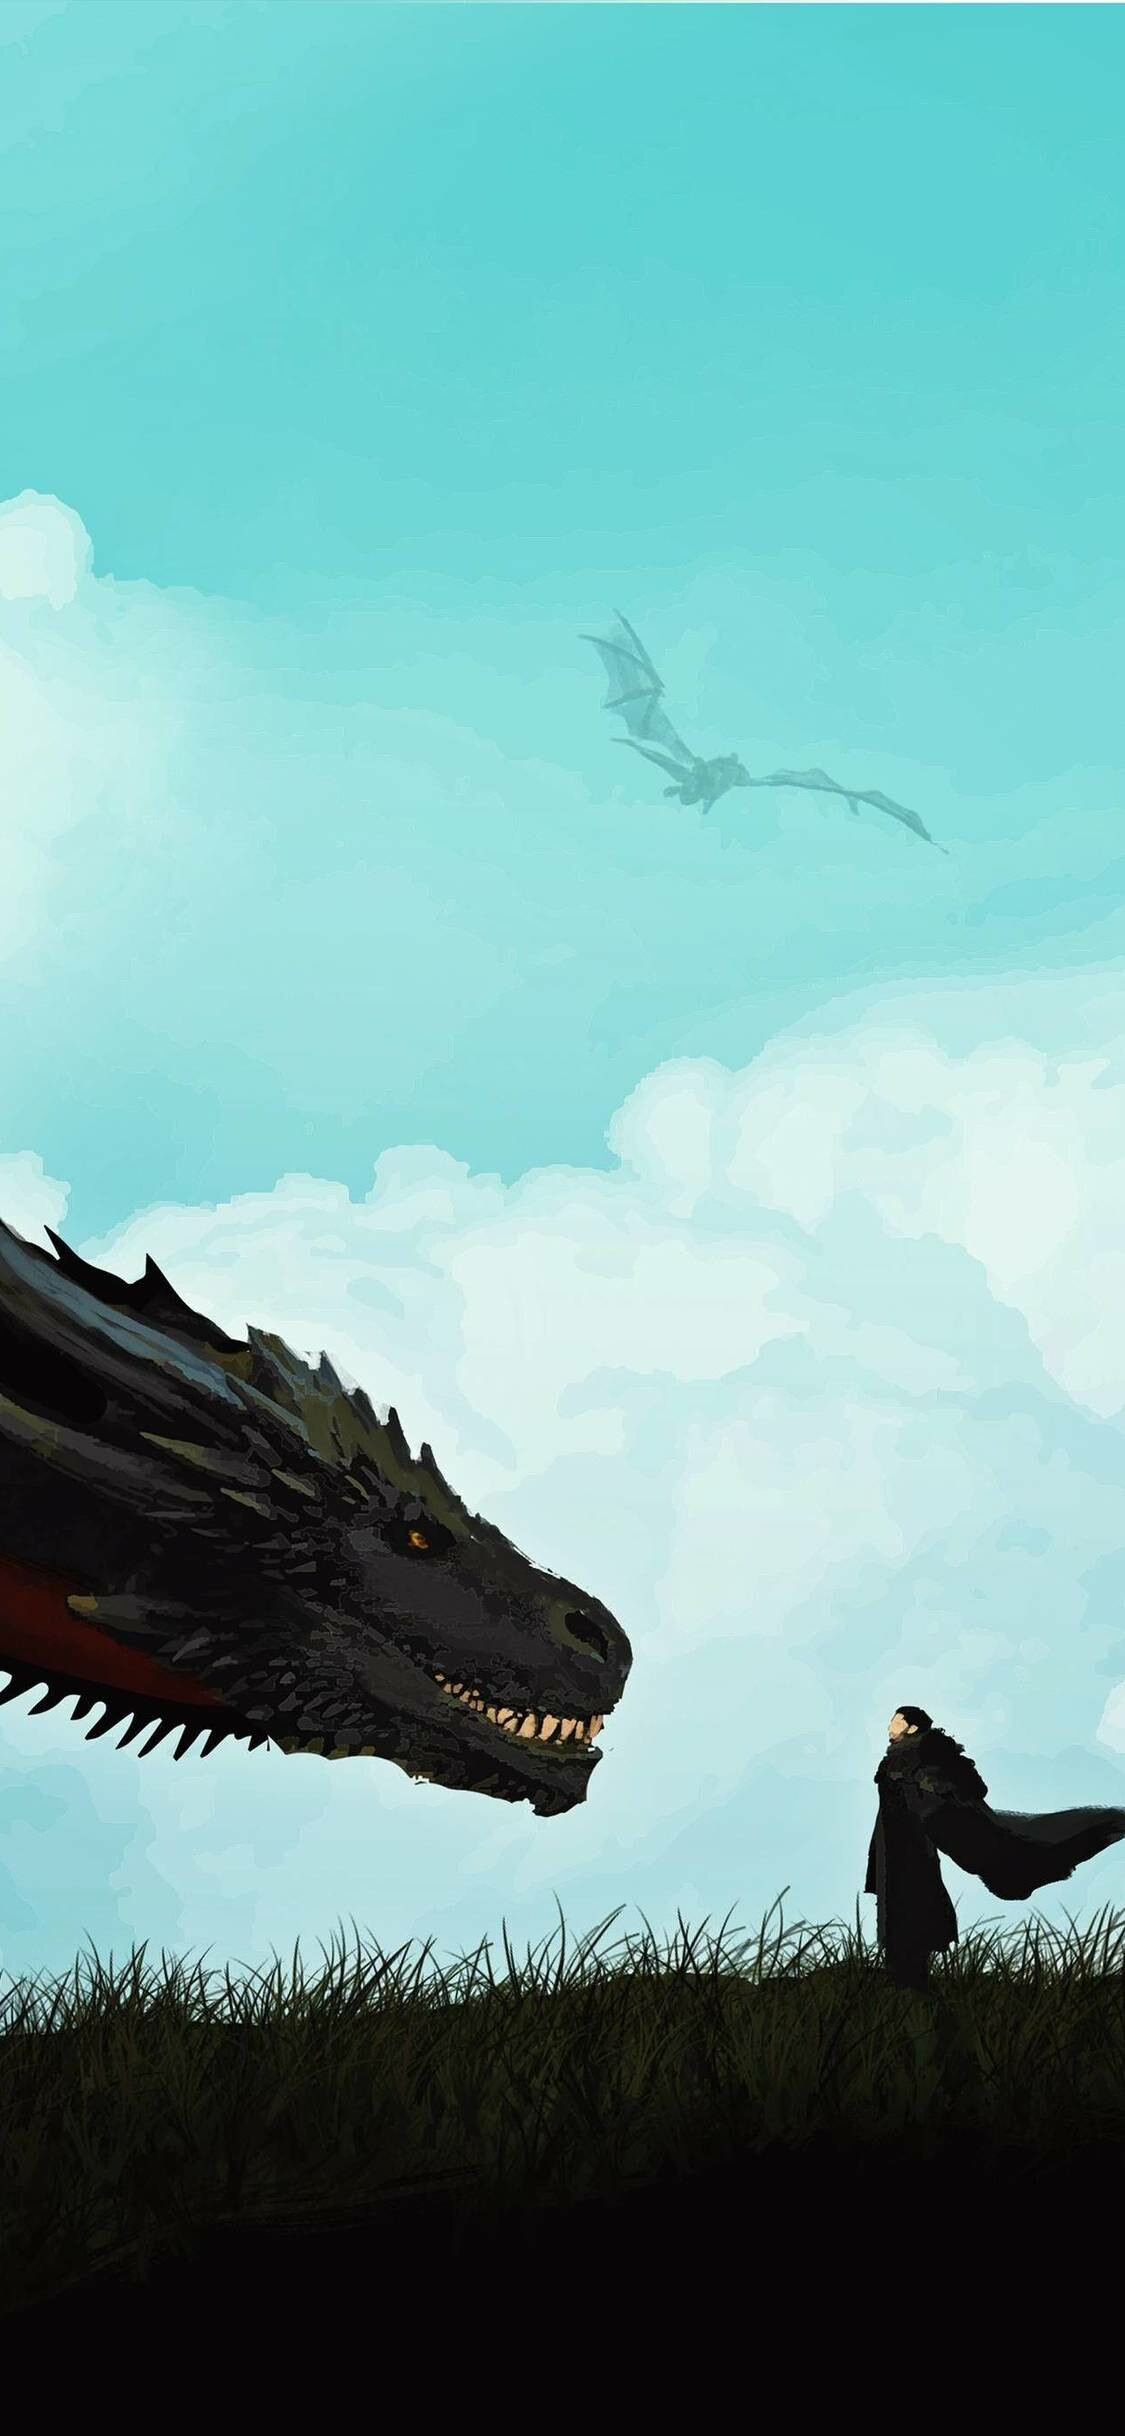 Game of Thrones: Jon Snow and Drogon, David Benioff and D. B. Weiss. 1130x2440 HD Background.